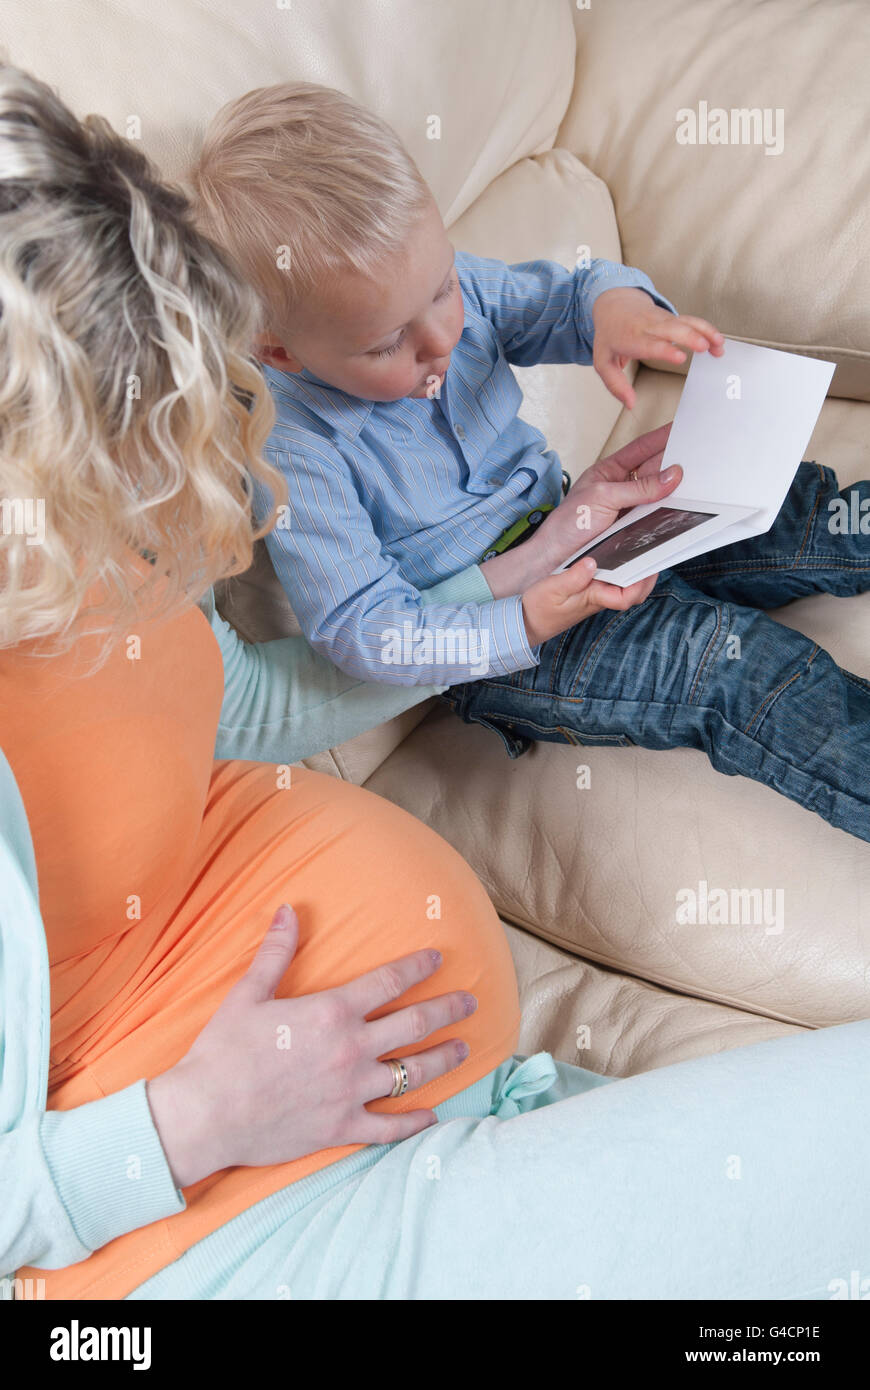 Pregnant woman showing baby scan photo to toddler son Stock Photo